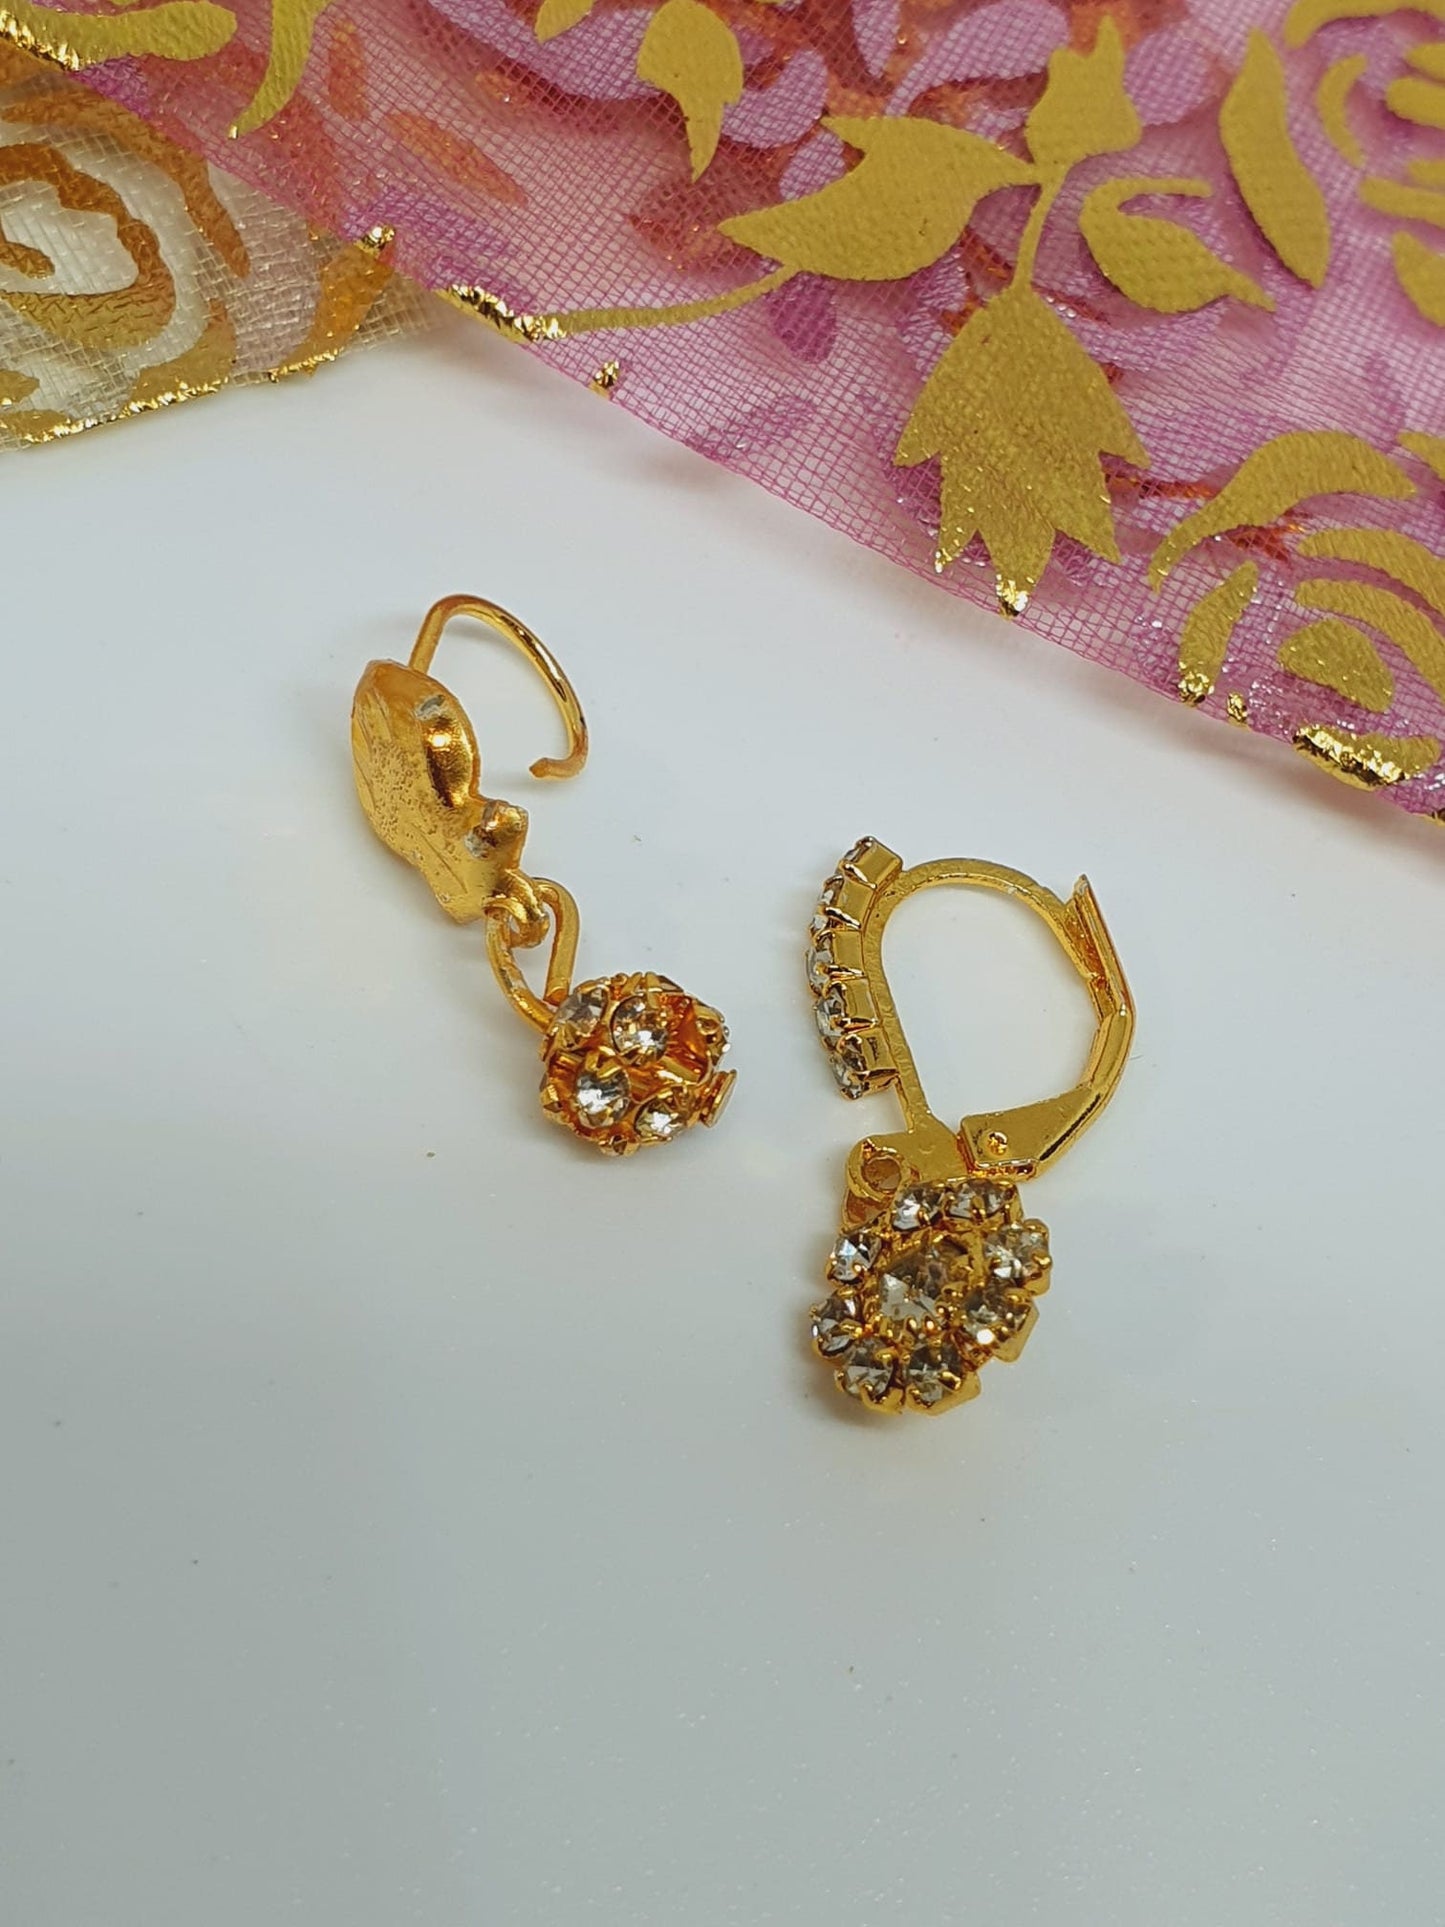 2 pieces Gold Plated Dangle Nose Ring Gold Tone Bollywood Wedding Indian Jewelry Women Pierced Nose